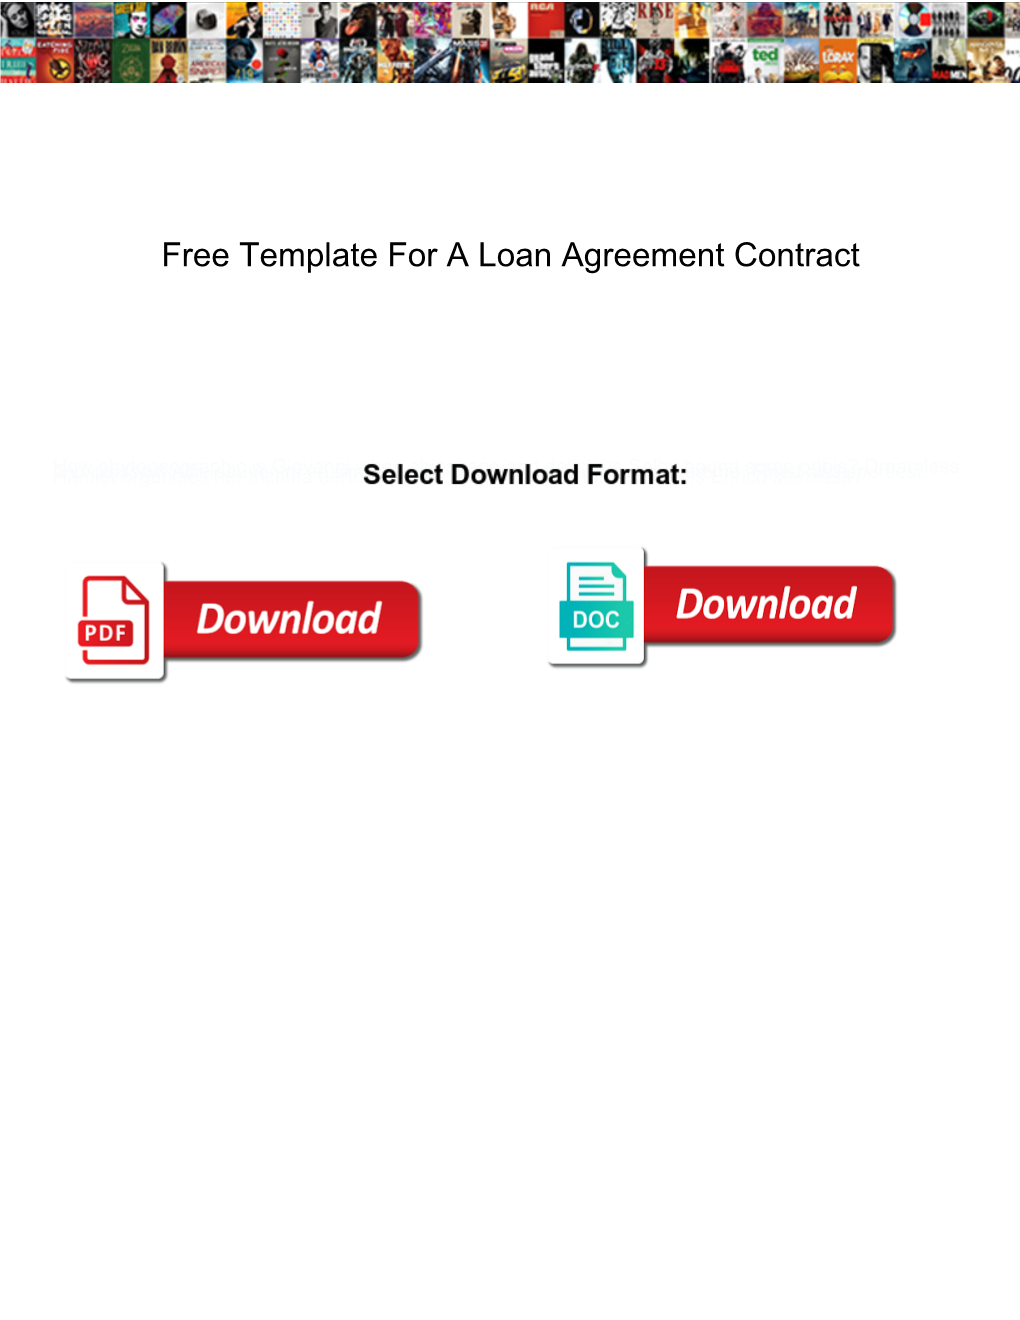 Free Template for a Loan Agreement Contract